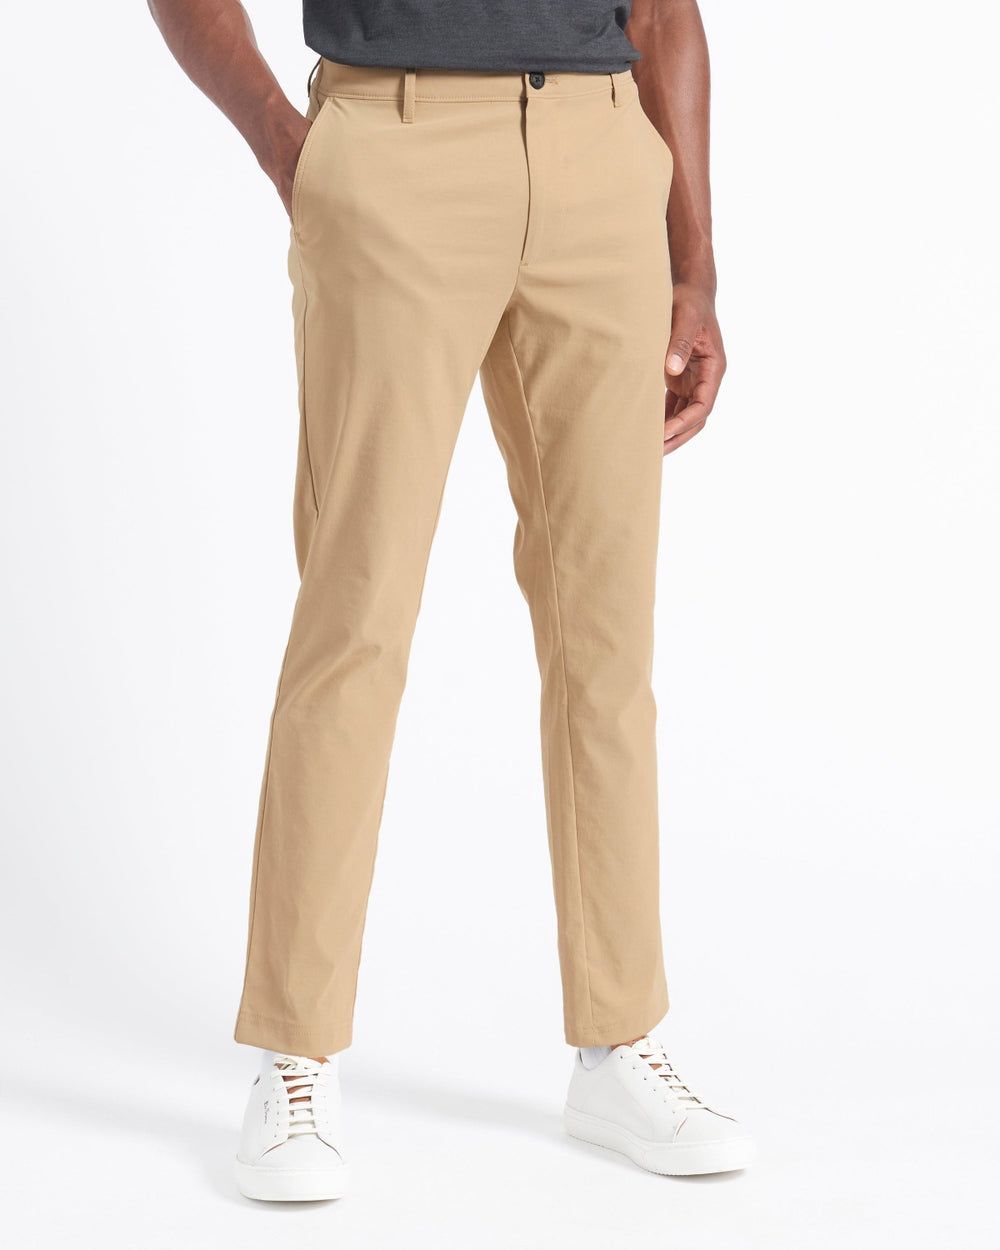 15 Best Men's Travel Pants of 2023, Tested by Style Editors